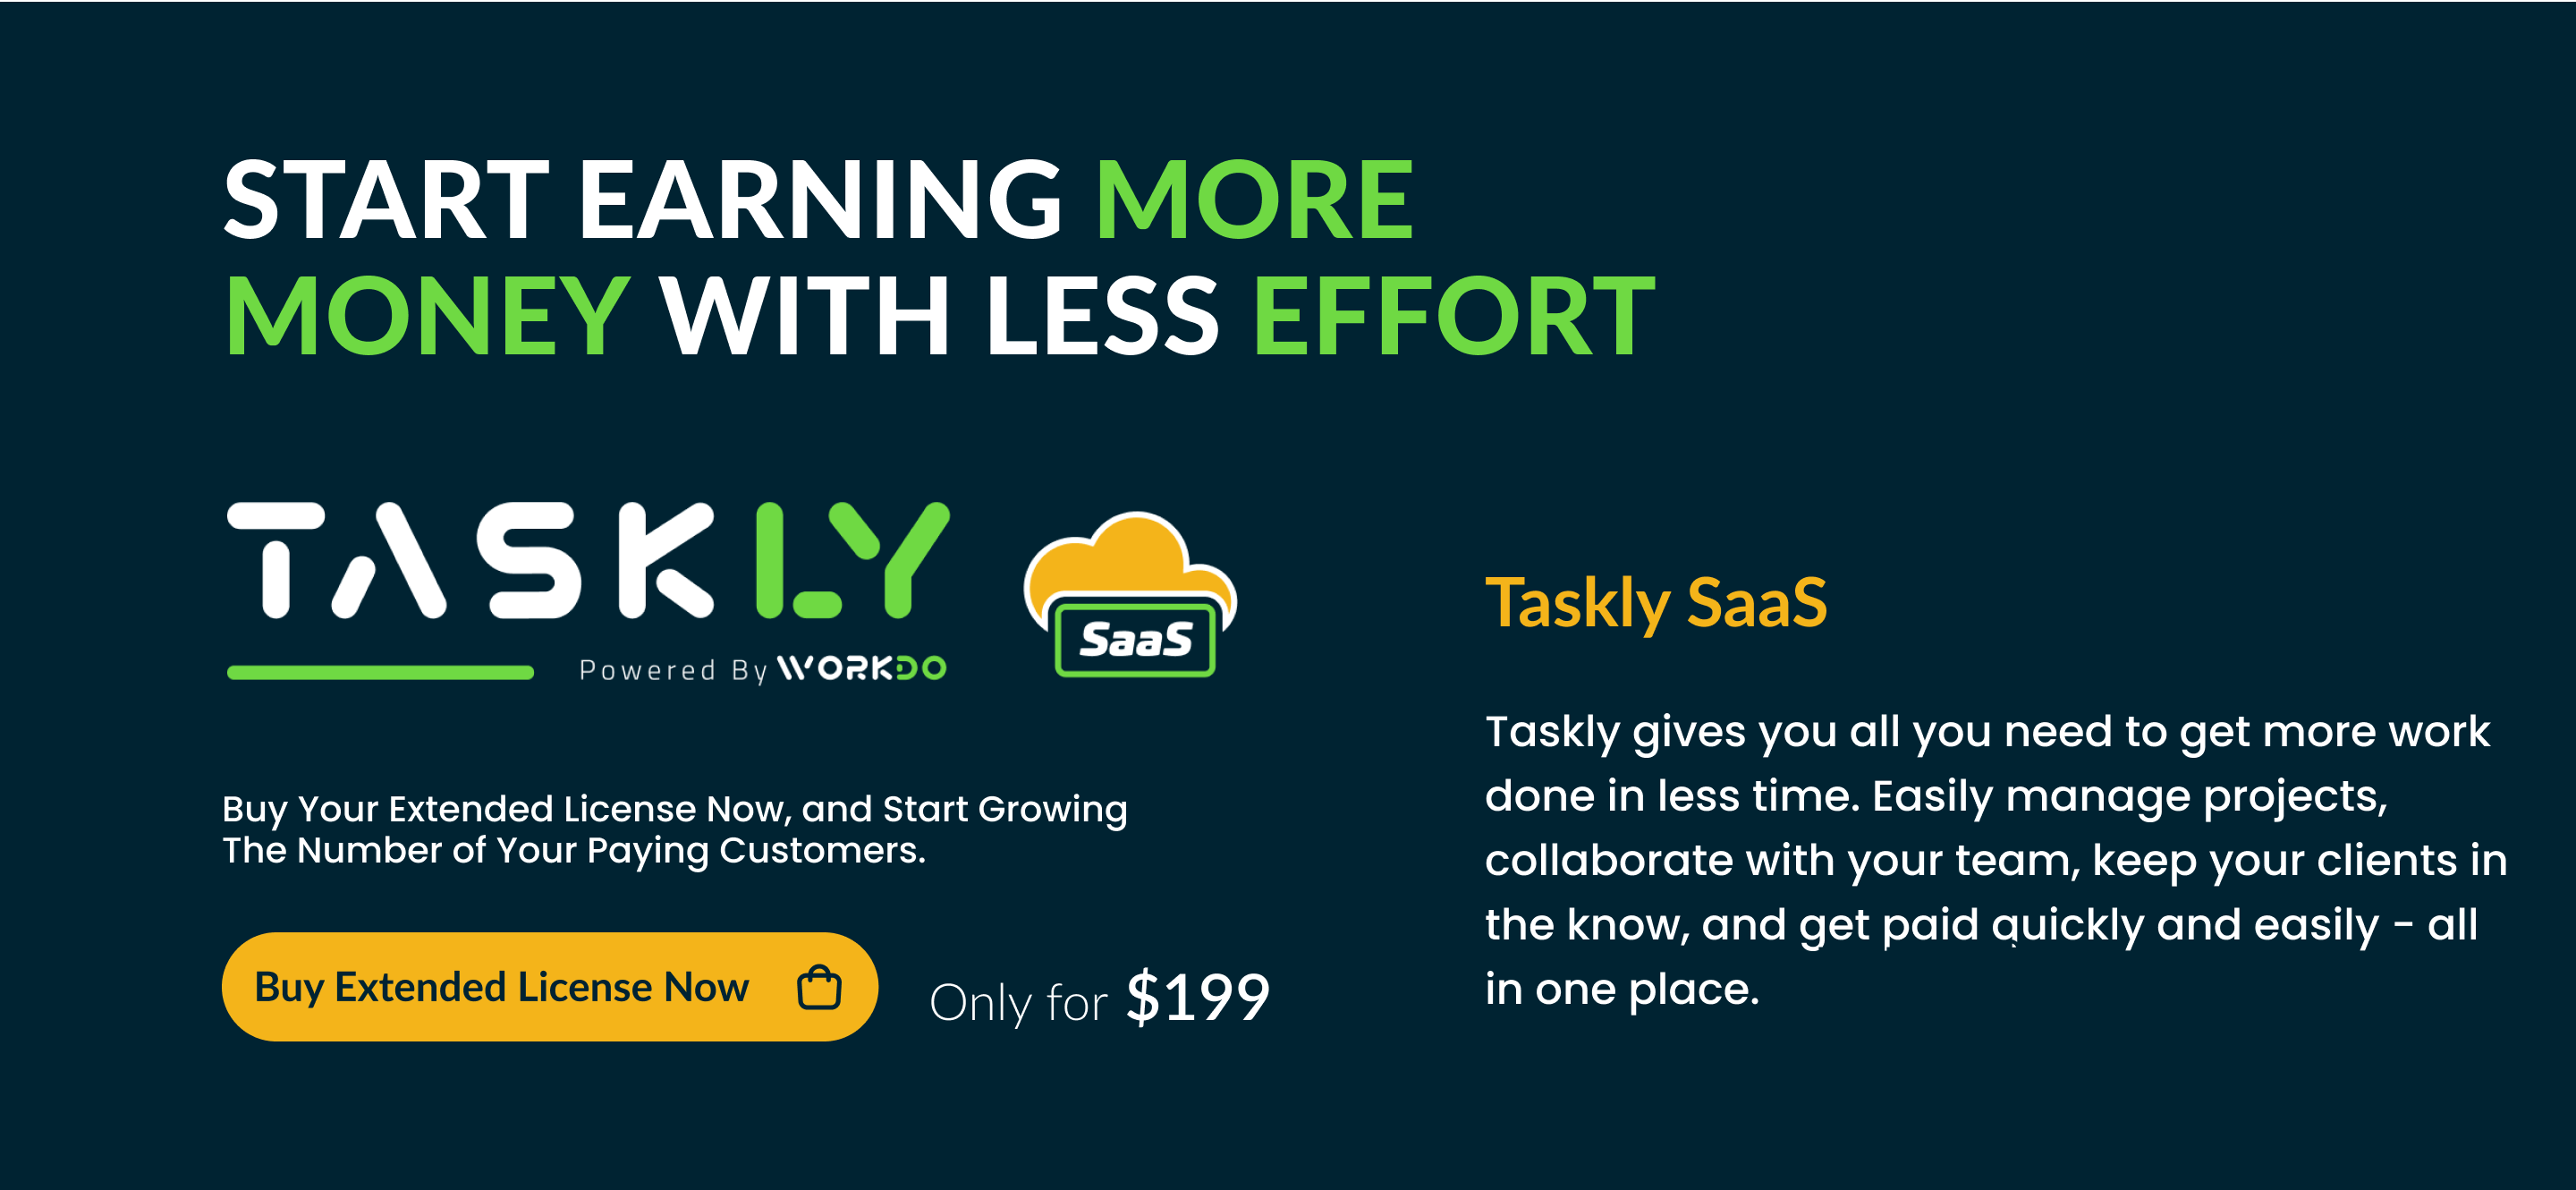 TASKLY SaaS – Project Management Tool - 8